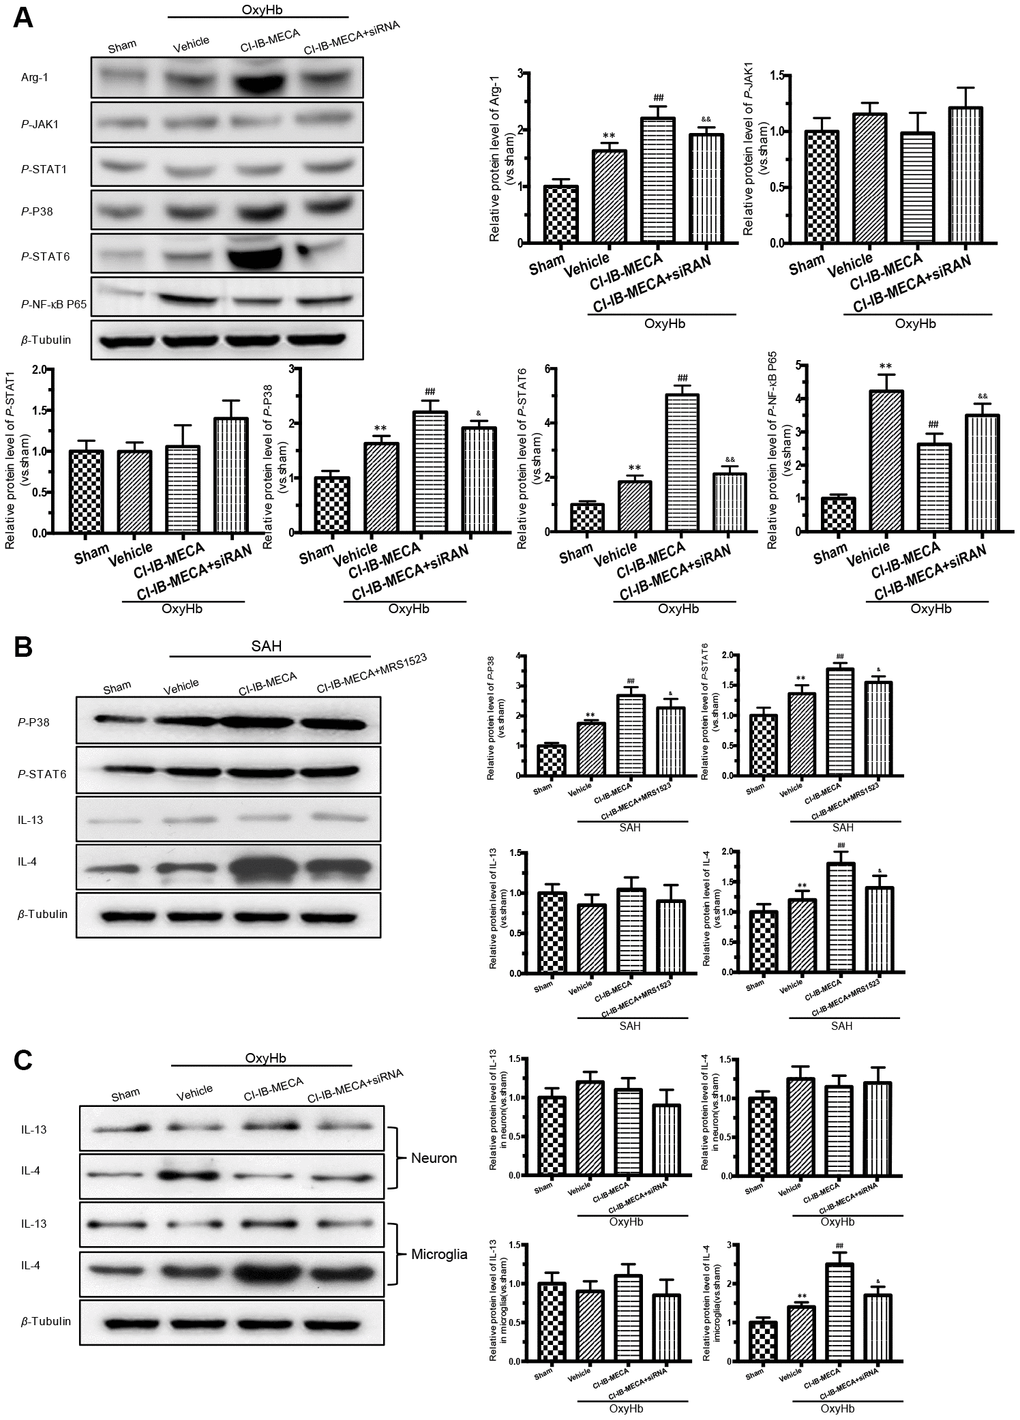 Activation of A3R induced the expression of Arg-1 in vitro, and enhanced the activation of P38, STAT6 both in vitro and in vivo. (A) Western blot analysis showing the expression of Arg-1 and phosphorylated JAK1, STAT1, P38, STAT6 and NF-κB P65 24 h after OxyHb treatment. The protein levels were quantified. (B) Effects of the A3R agonist (CI-IB-MECA) and antagonist (MRS1523) on the P38/STAT6 pathway, IL-13 and IL-4(STAT6 activator) in vivo 24 h after SAH. Western blot analysis showing the protein of phosphorylated P38 (p-P38), STAT6 (p-STAT6), IL-13 and IL-4 under the indicated treatments. (C) Effect of CI-IB-MECA on the expression of IL-13 and IL-4, in neuron or microglia in vitro. β-Tubulin was used as a loading control. n=5 in each group. Data are shown as the mean ± SD. **p p p p 